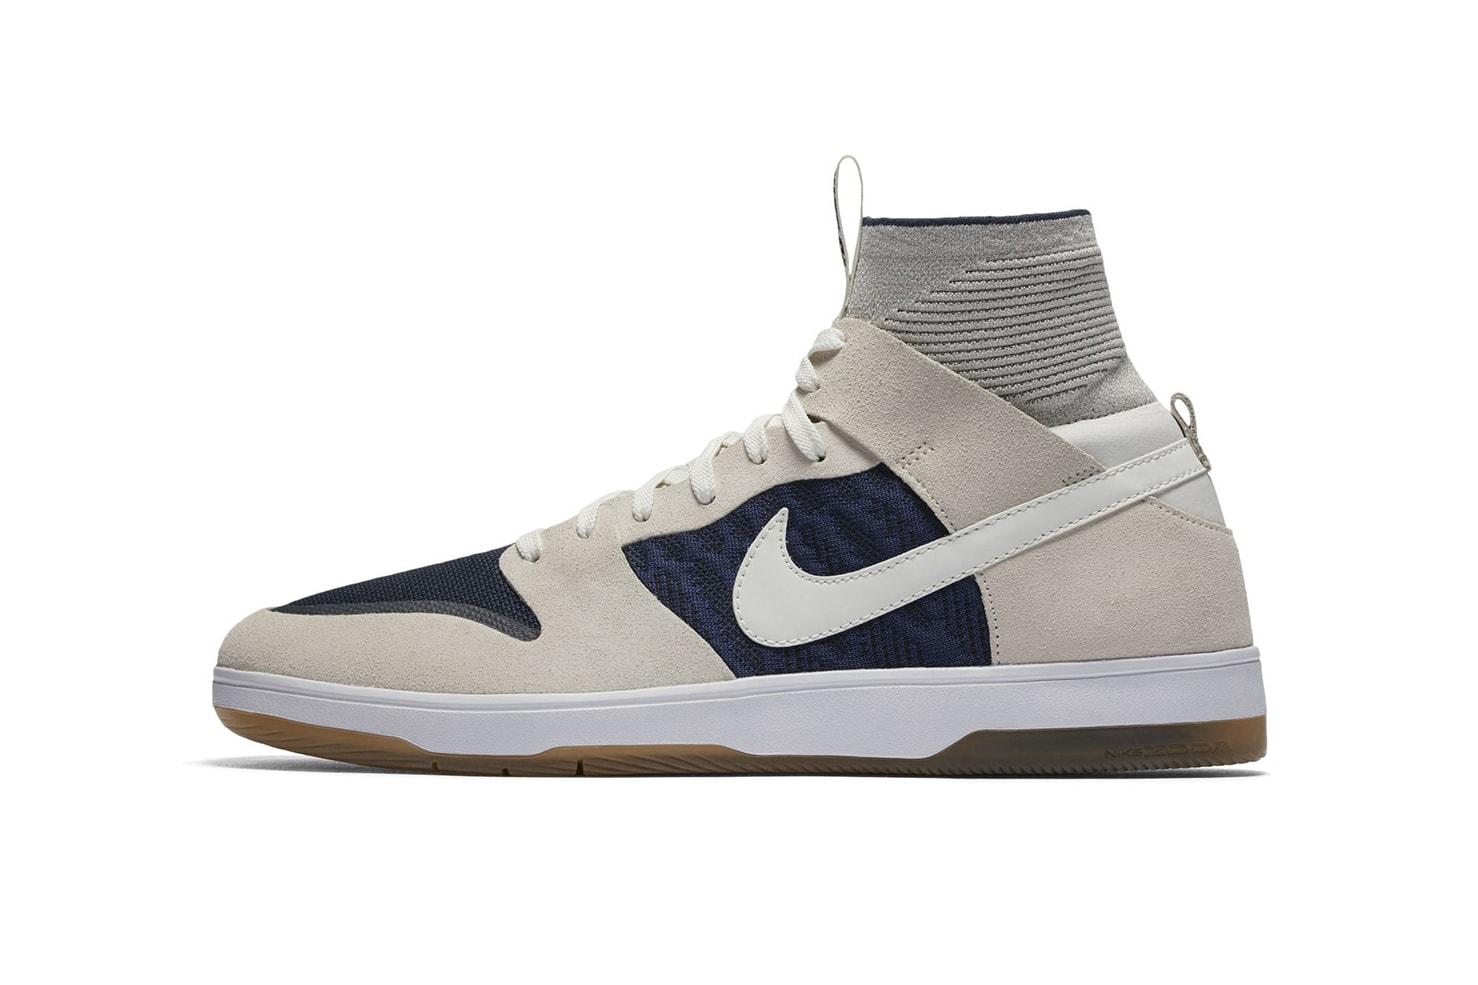 Nike SB Dunk High Elite Off White Navy Gum Sole Sneakers Shoes Footwear 2017 September 1 Release Date Info